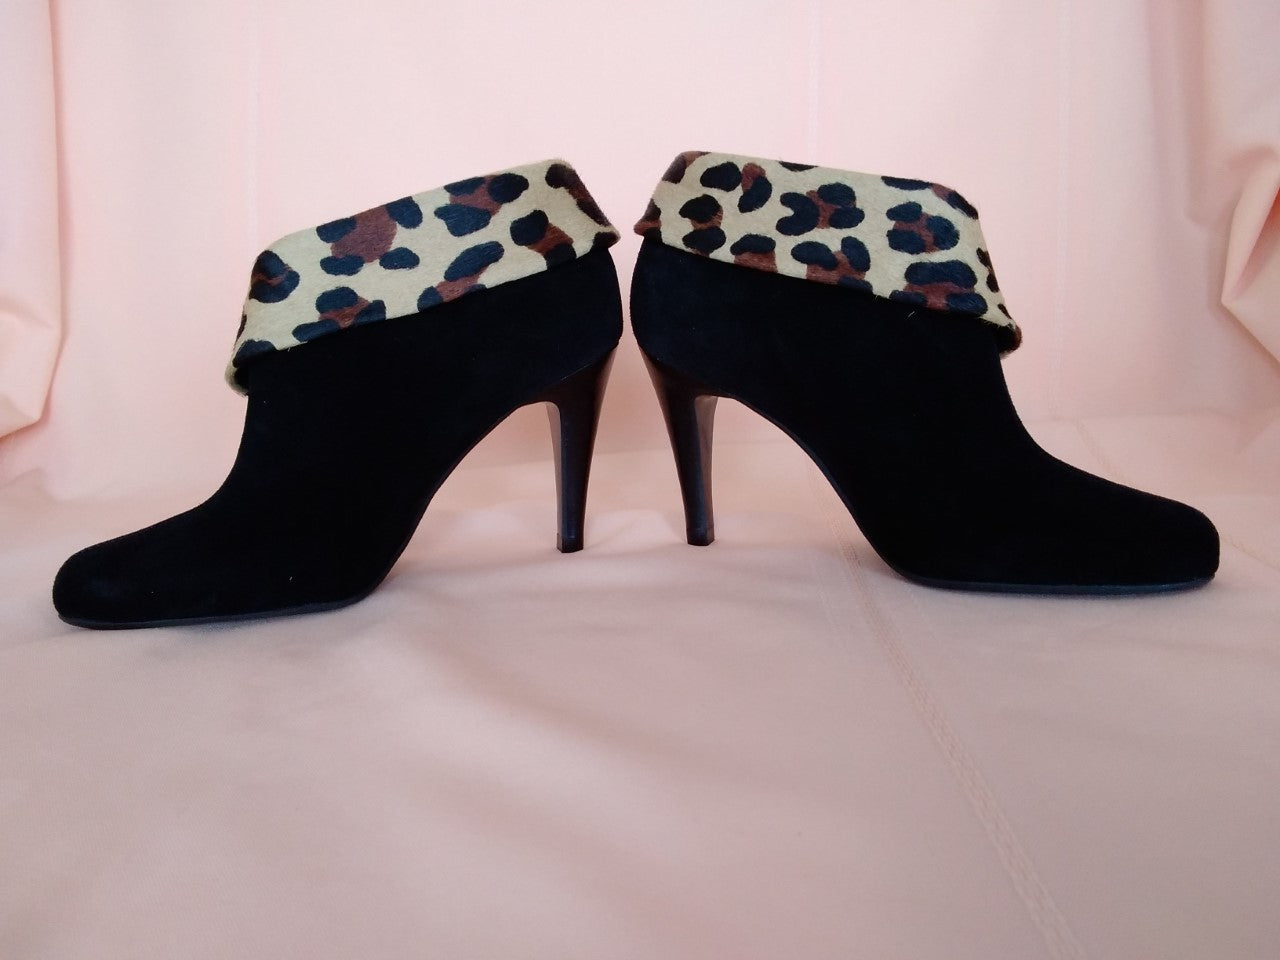 Talbots Black and Leopard Print High Hill Ankle Boot - Size 5B